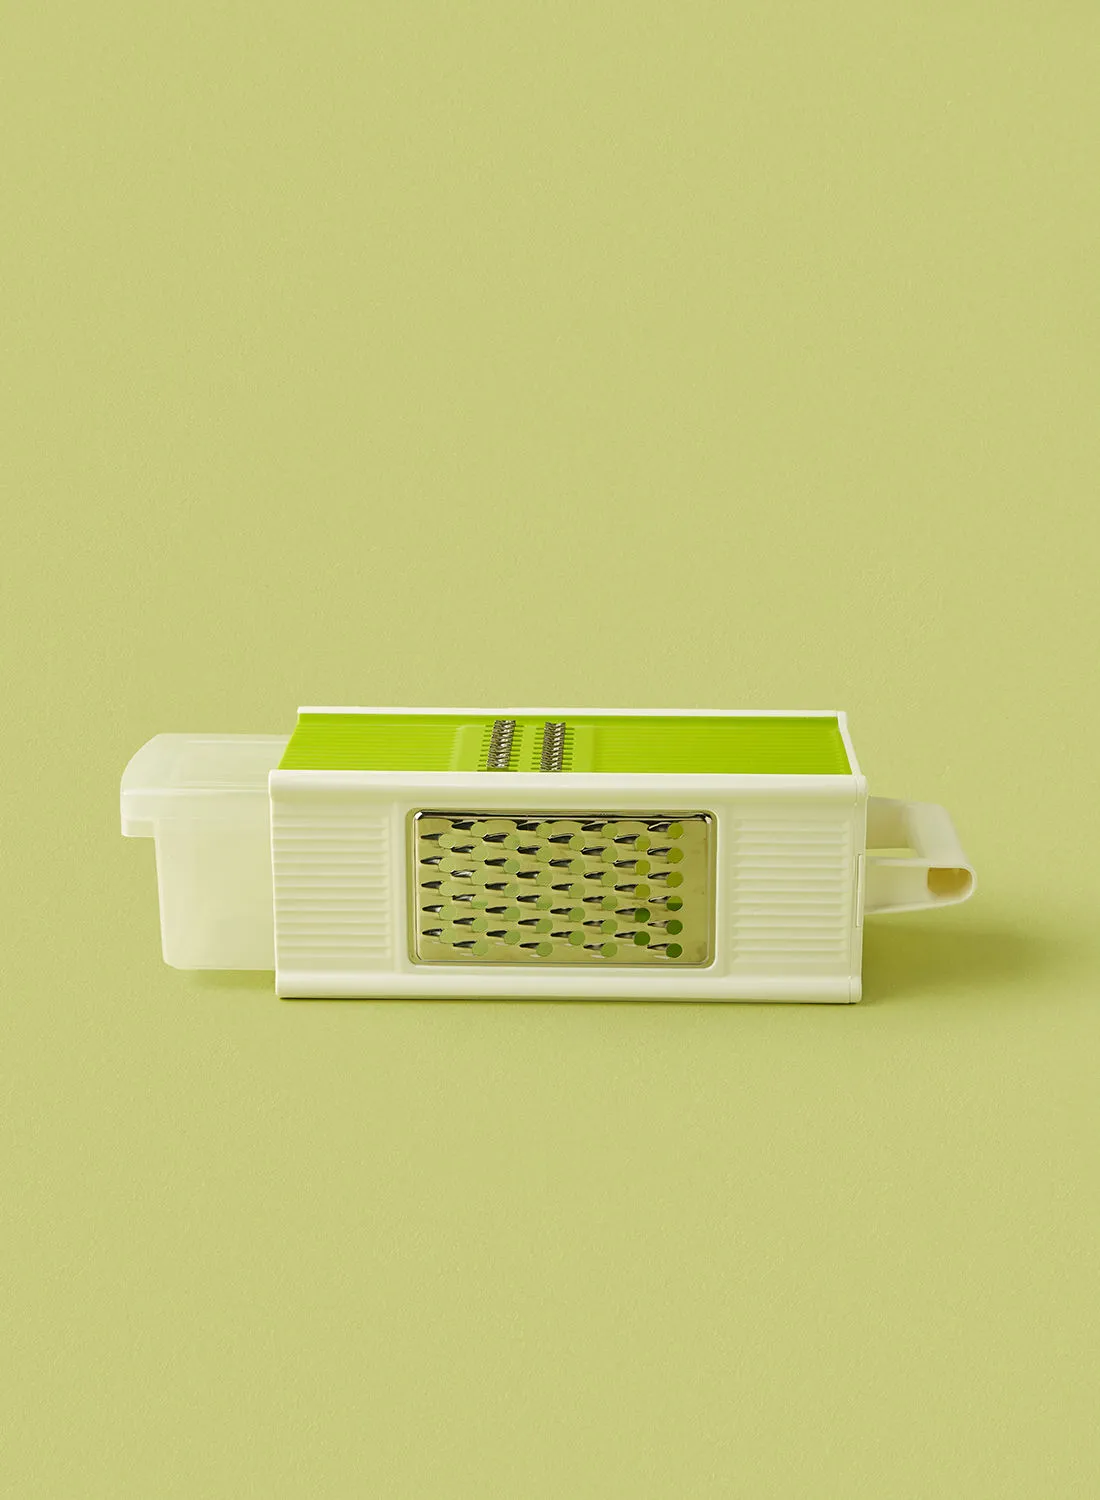 noon east Vegetable Grater With Box - Vegetable Grater With Box - Kitchen Accessories - Kitchen Tool - Fruits - Green/White